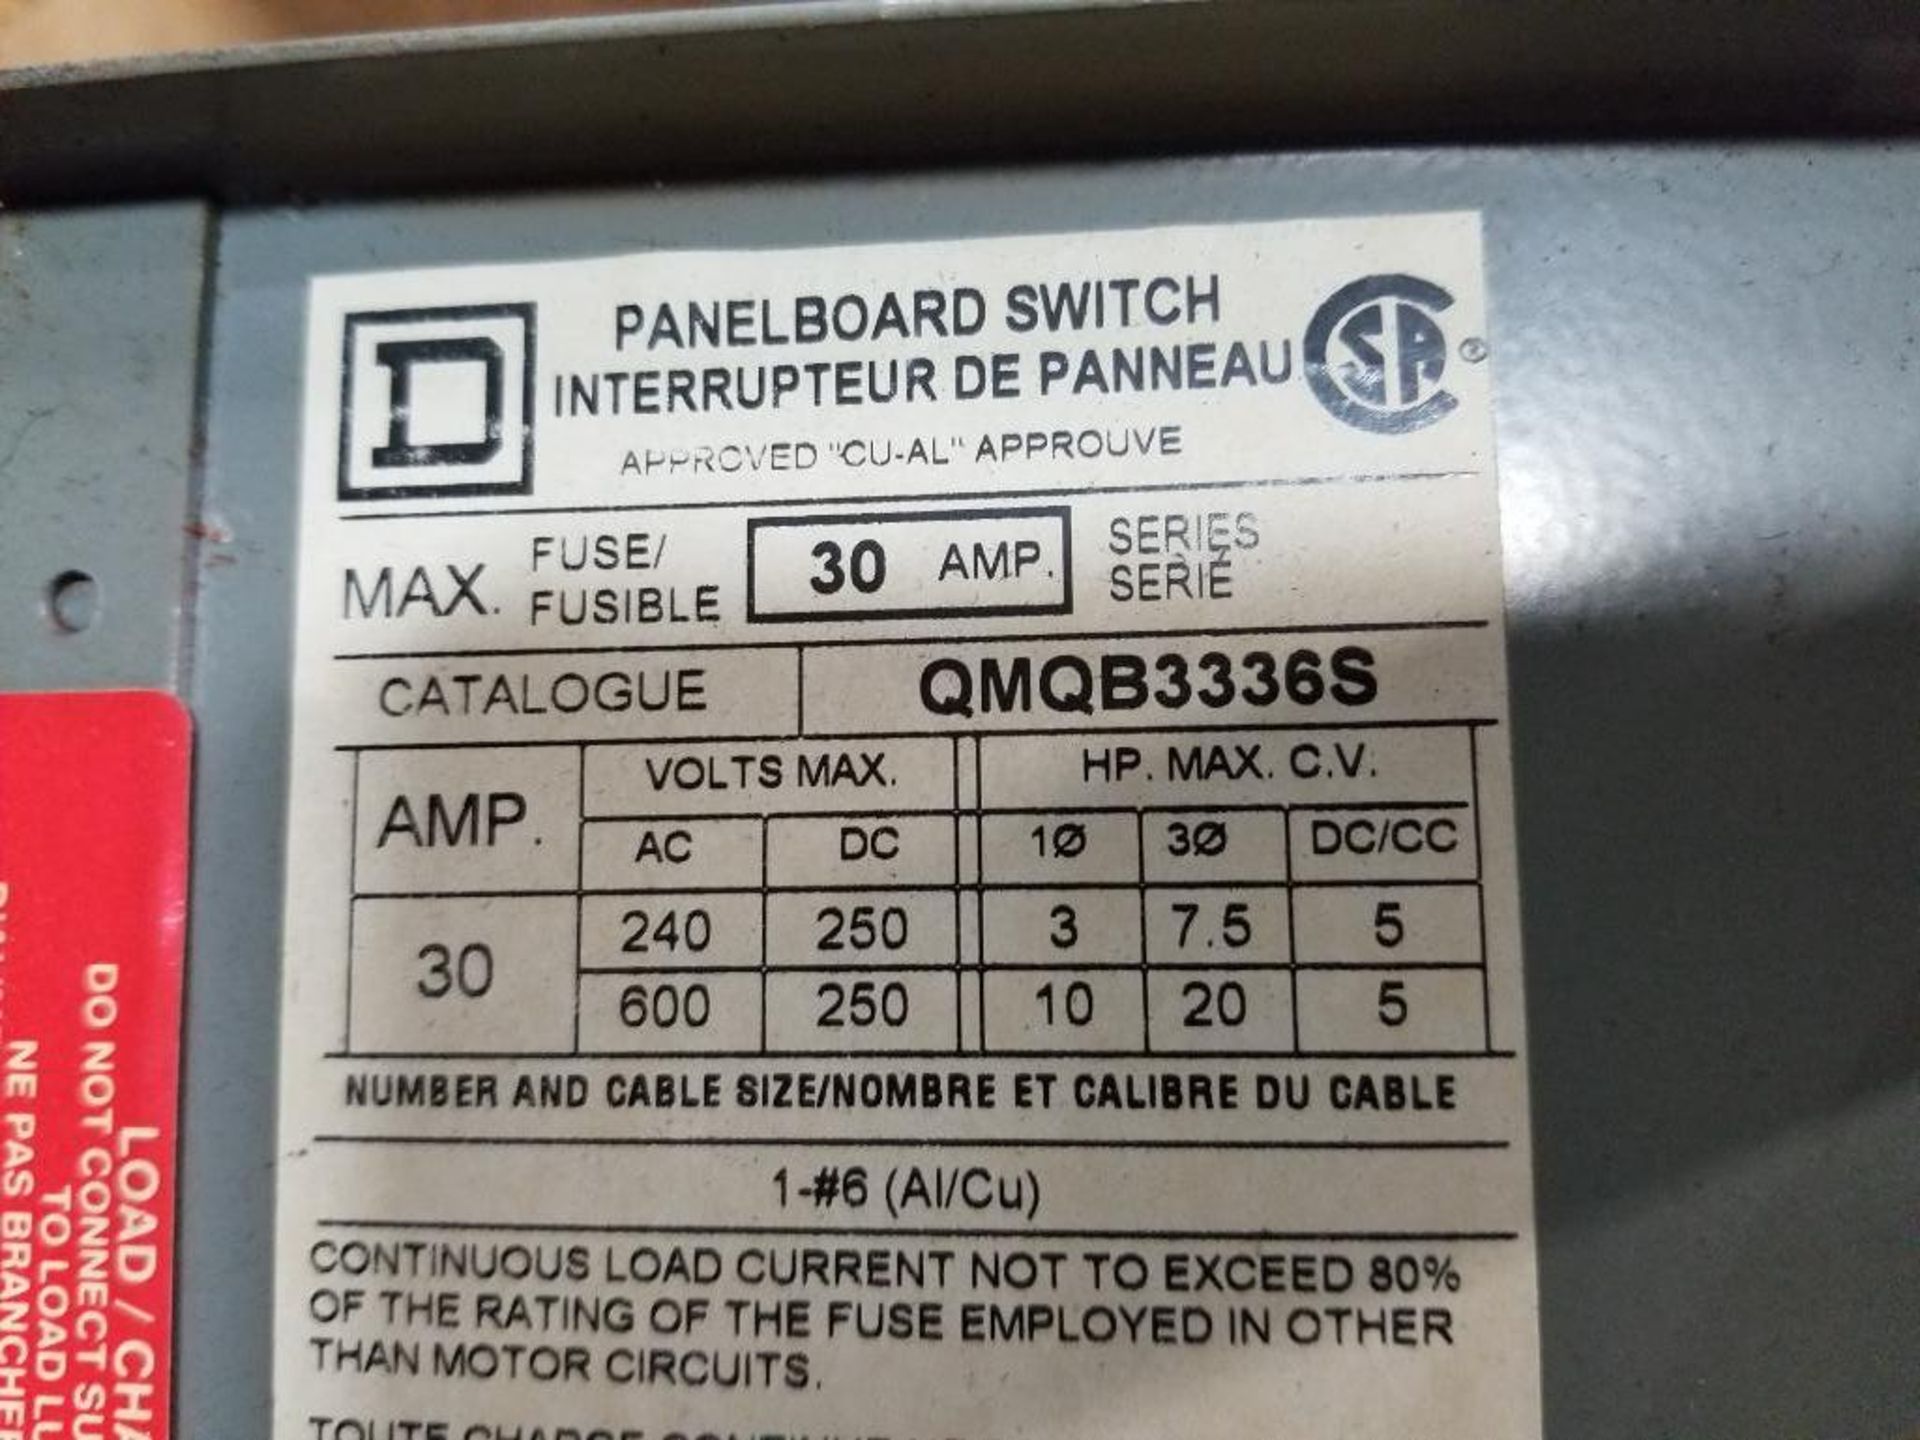 Square-D panelboard switch. QMQB3336S 30AMP fusible. - Image 5 of 7